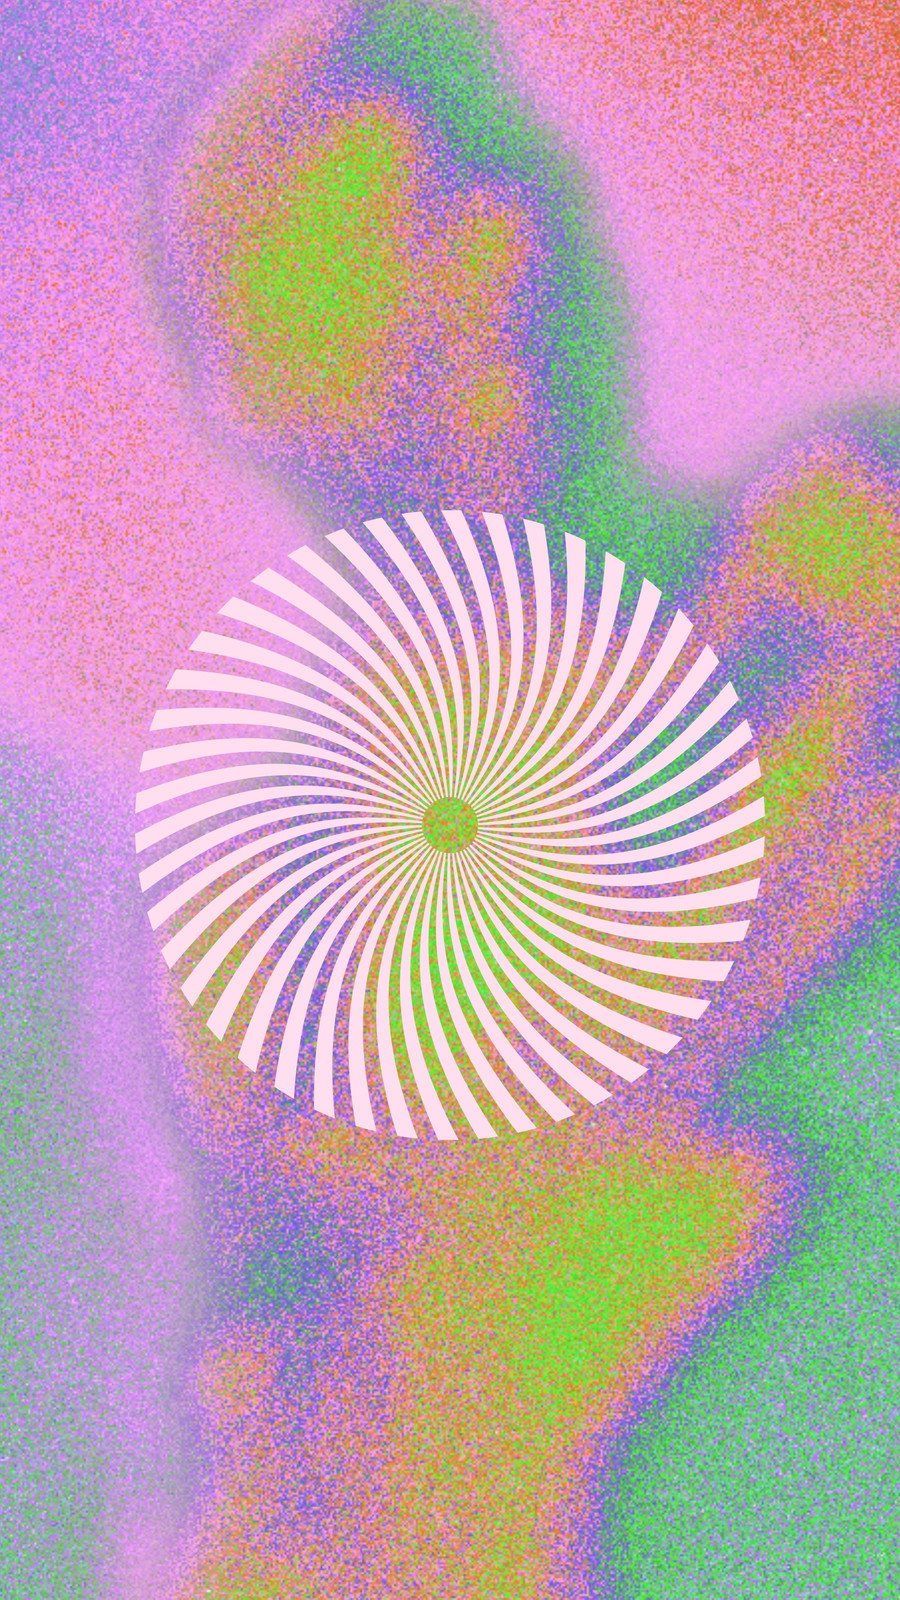 A pink, green, and purple spiral image - Psychedelic